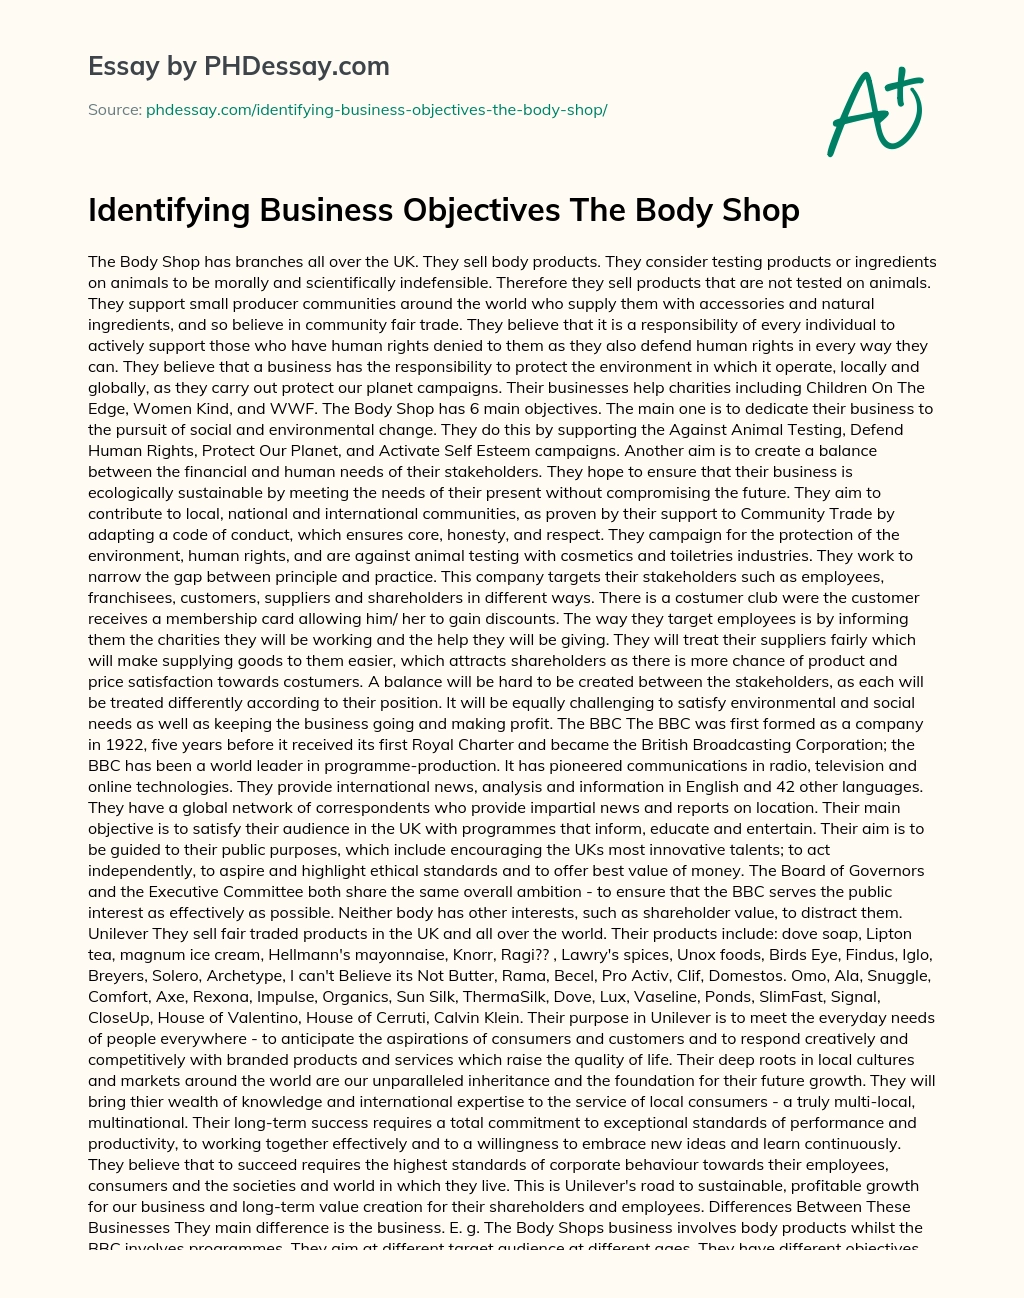 Identifying Business Objectives The Body Shop essay